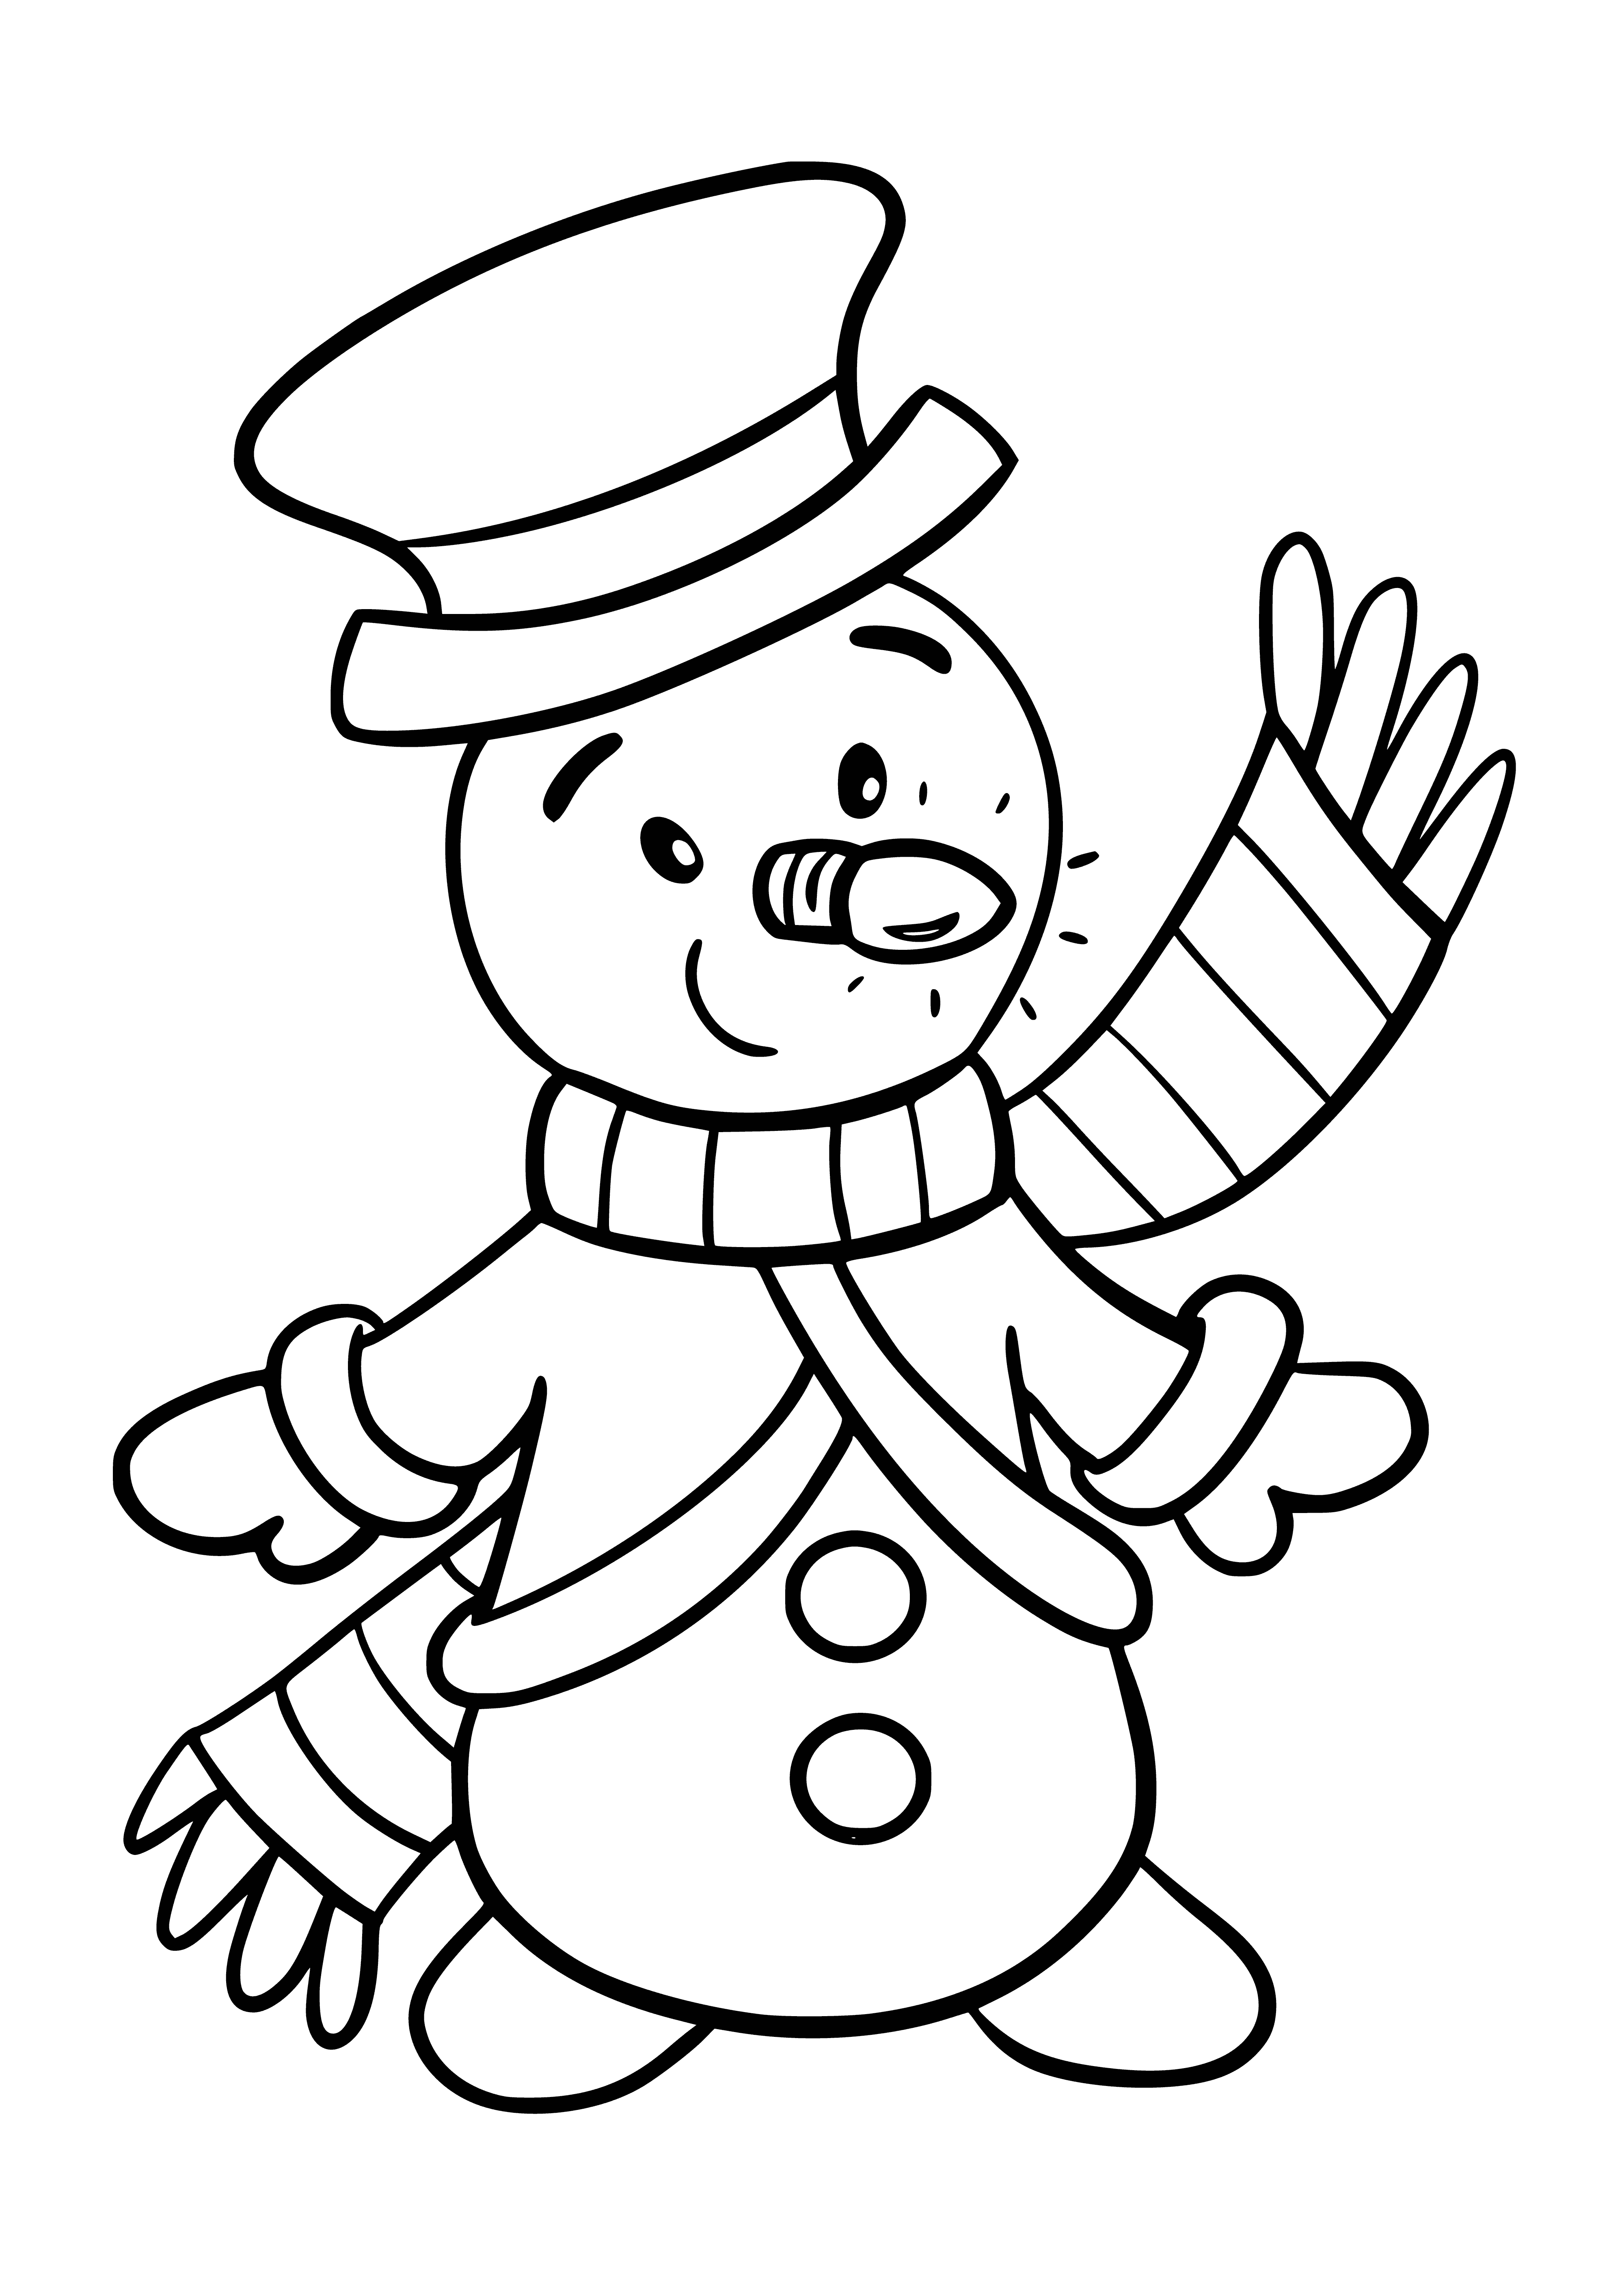 coloring page: Two snowmen, dressed alike, stand side by side with carrot noses & coal eyes; each holds an arm up in the air.